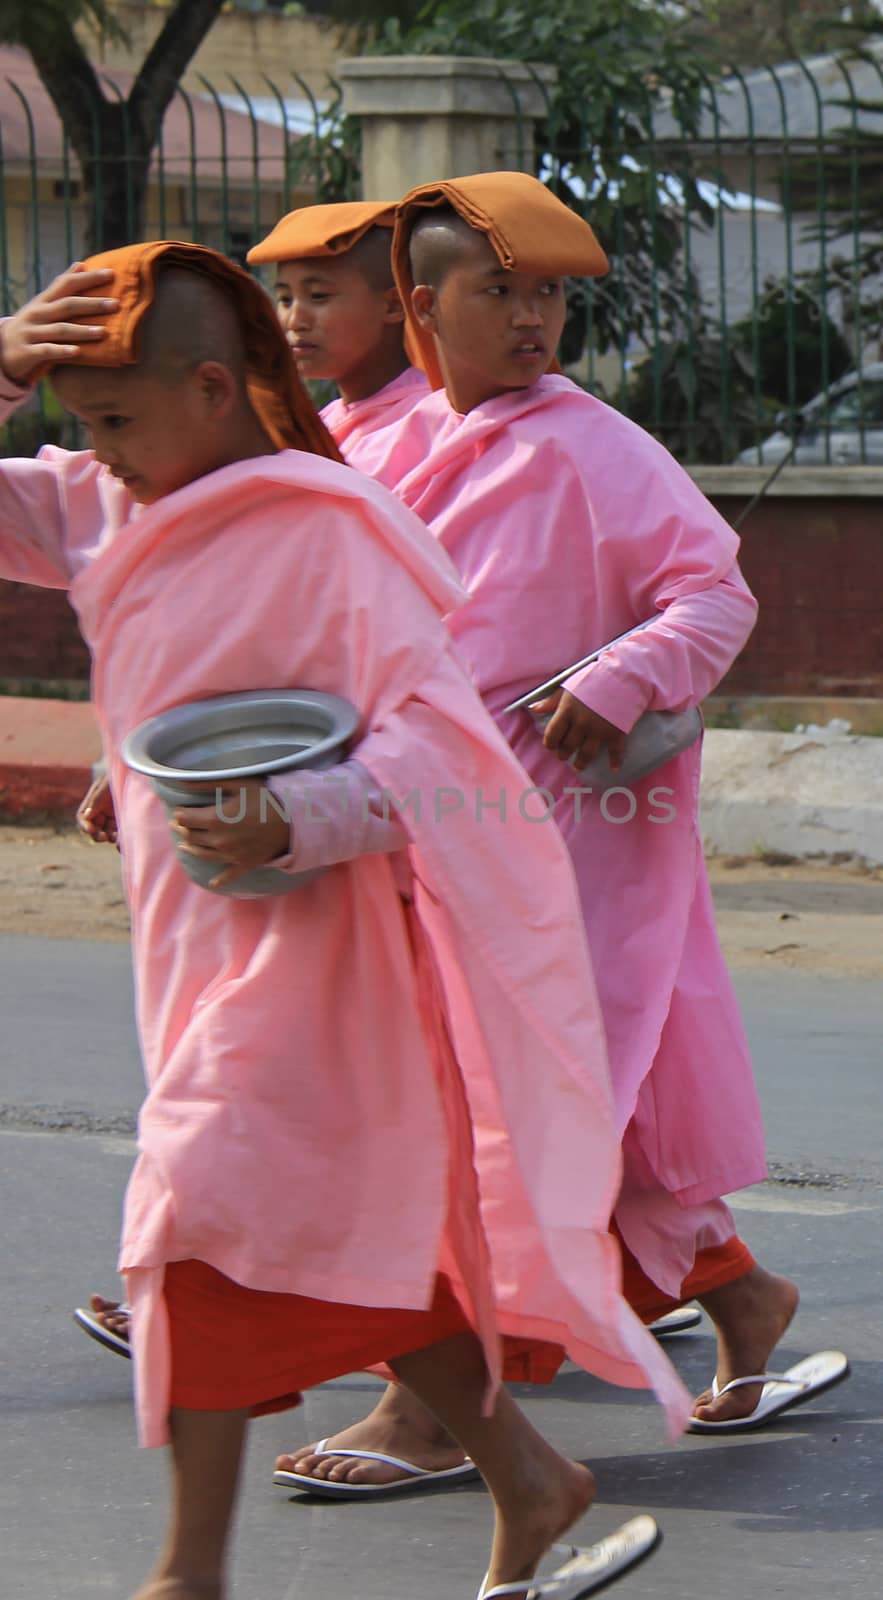 Buddhist nuns in Myanmar Feb 2015 No model release Editorial use only